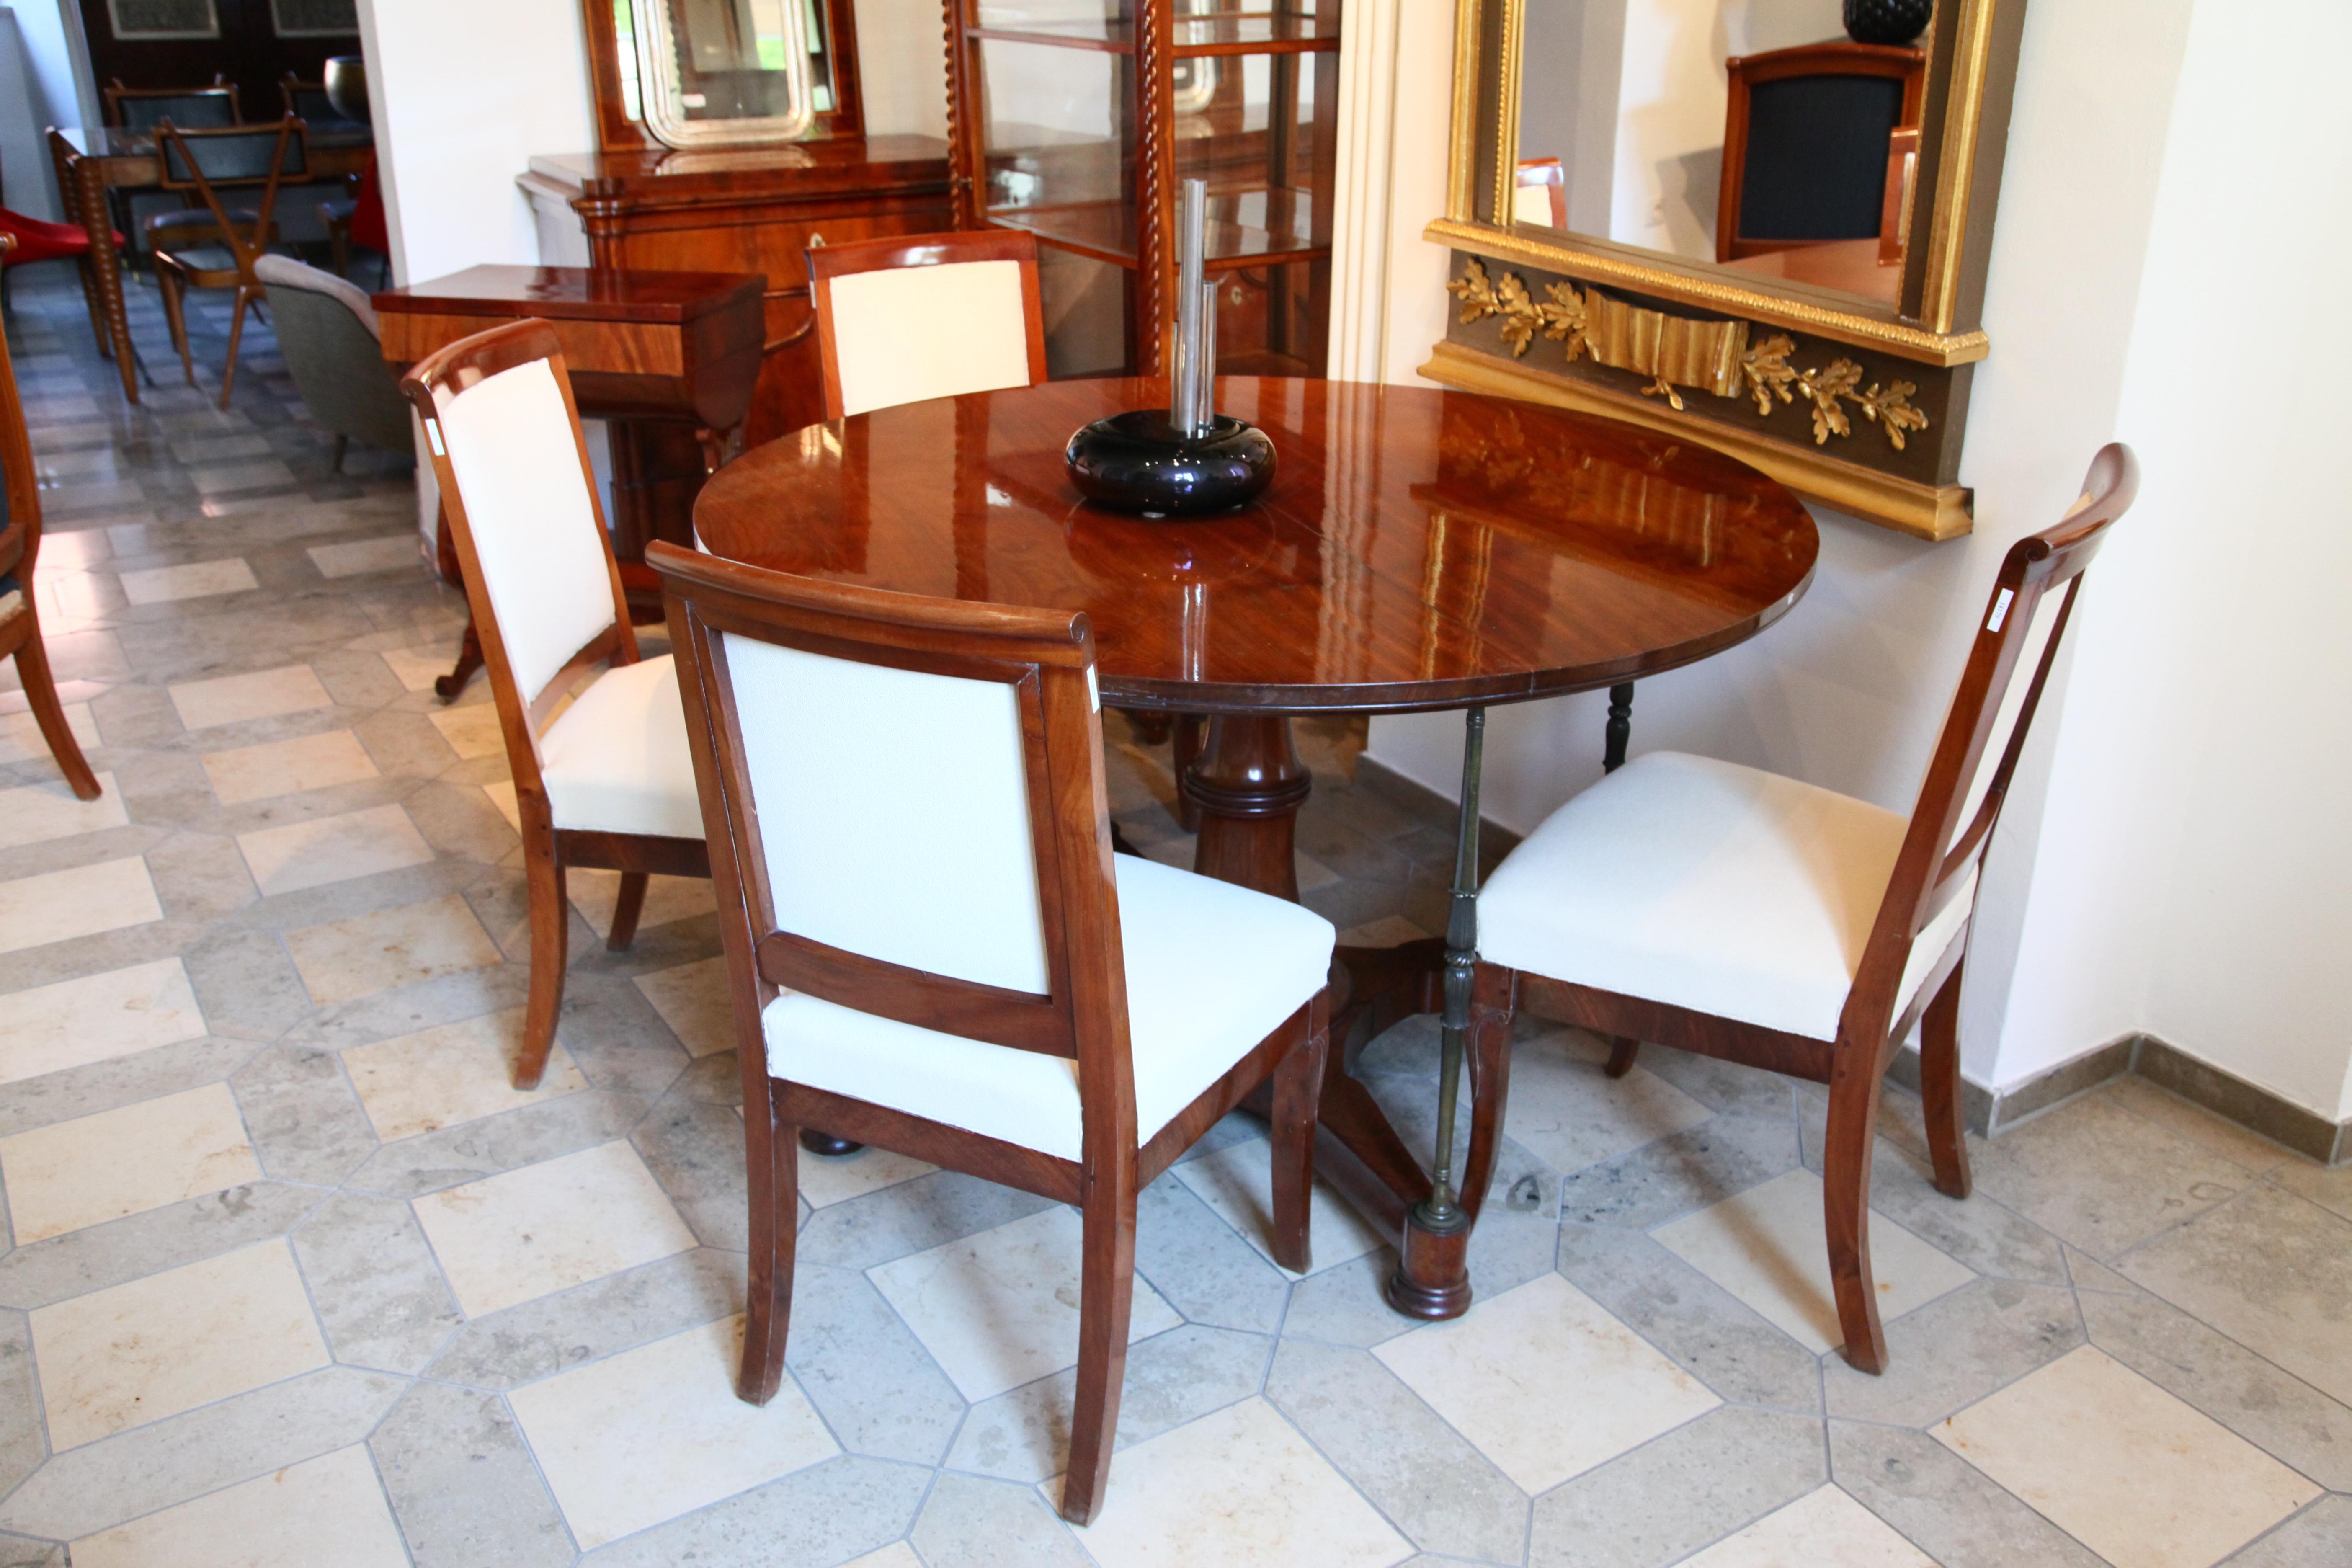 Set of six mahogany Biedermeier chairs, upholstered with a crème fabric.